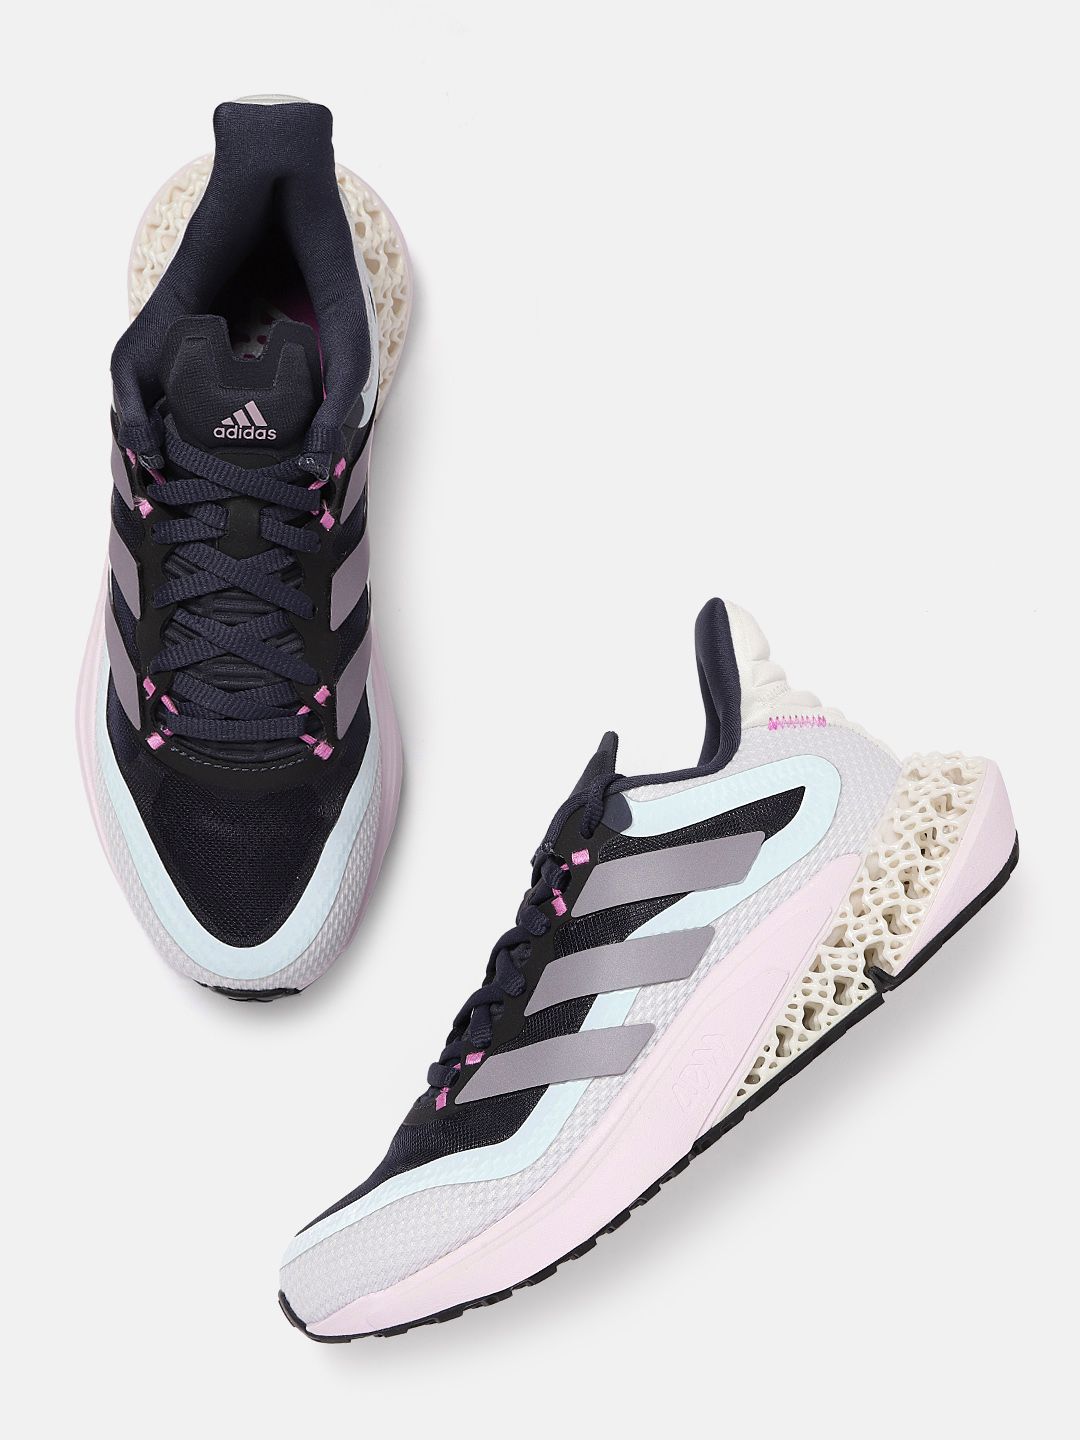 ADIDAS Women Black Blue & White Colourblocked 4DFWD Pulse Textile Running Shoes Price in India